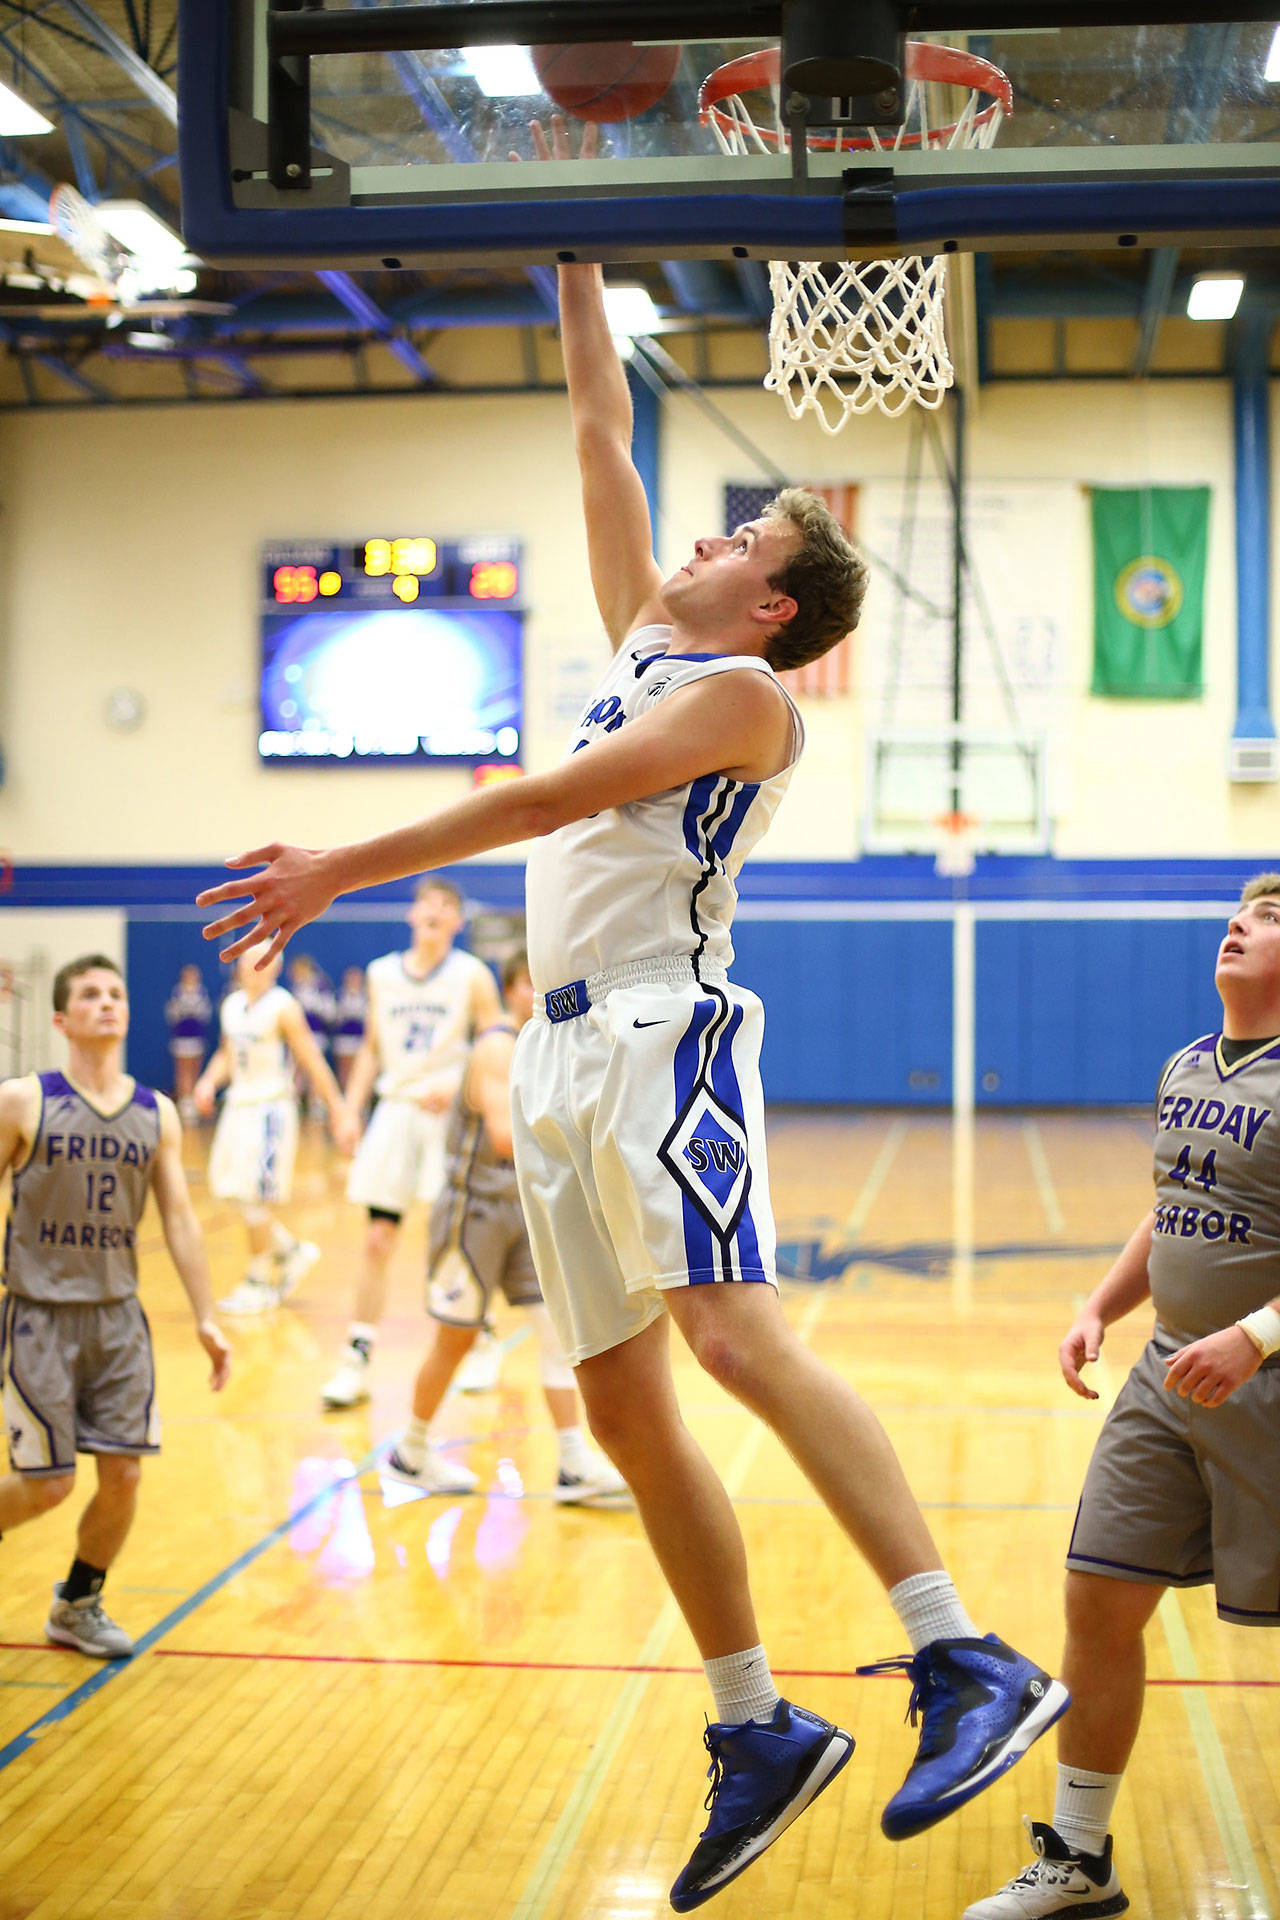 Levi Buck shoots a reverse lay-up for the Falcons. (Photo by John Fisken)